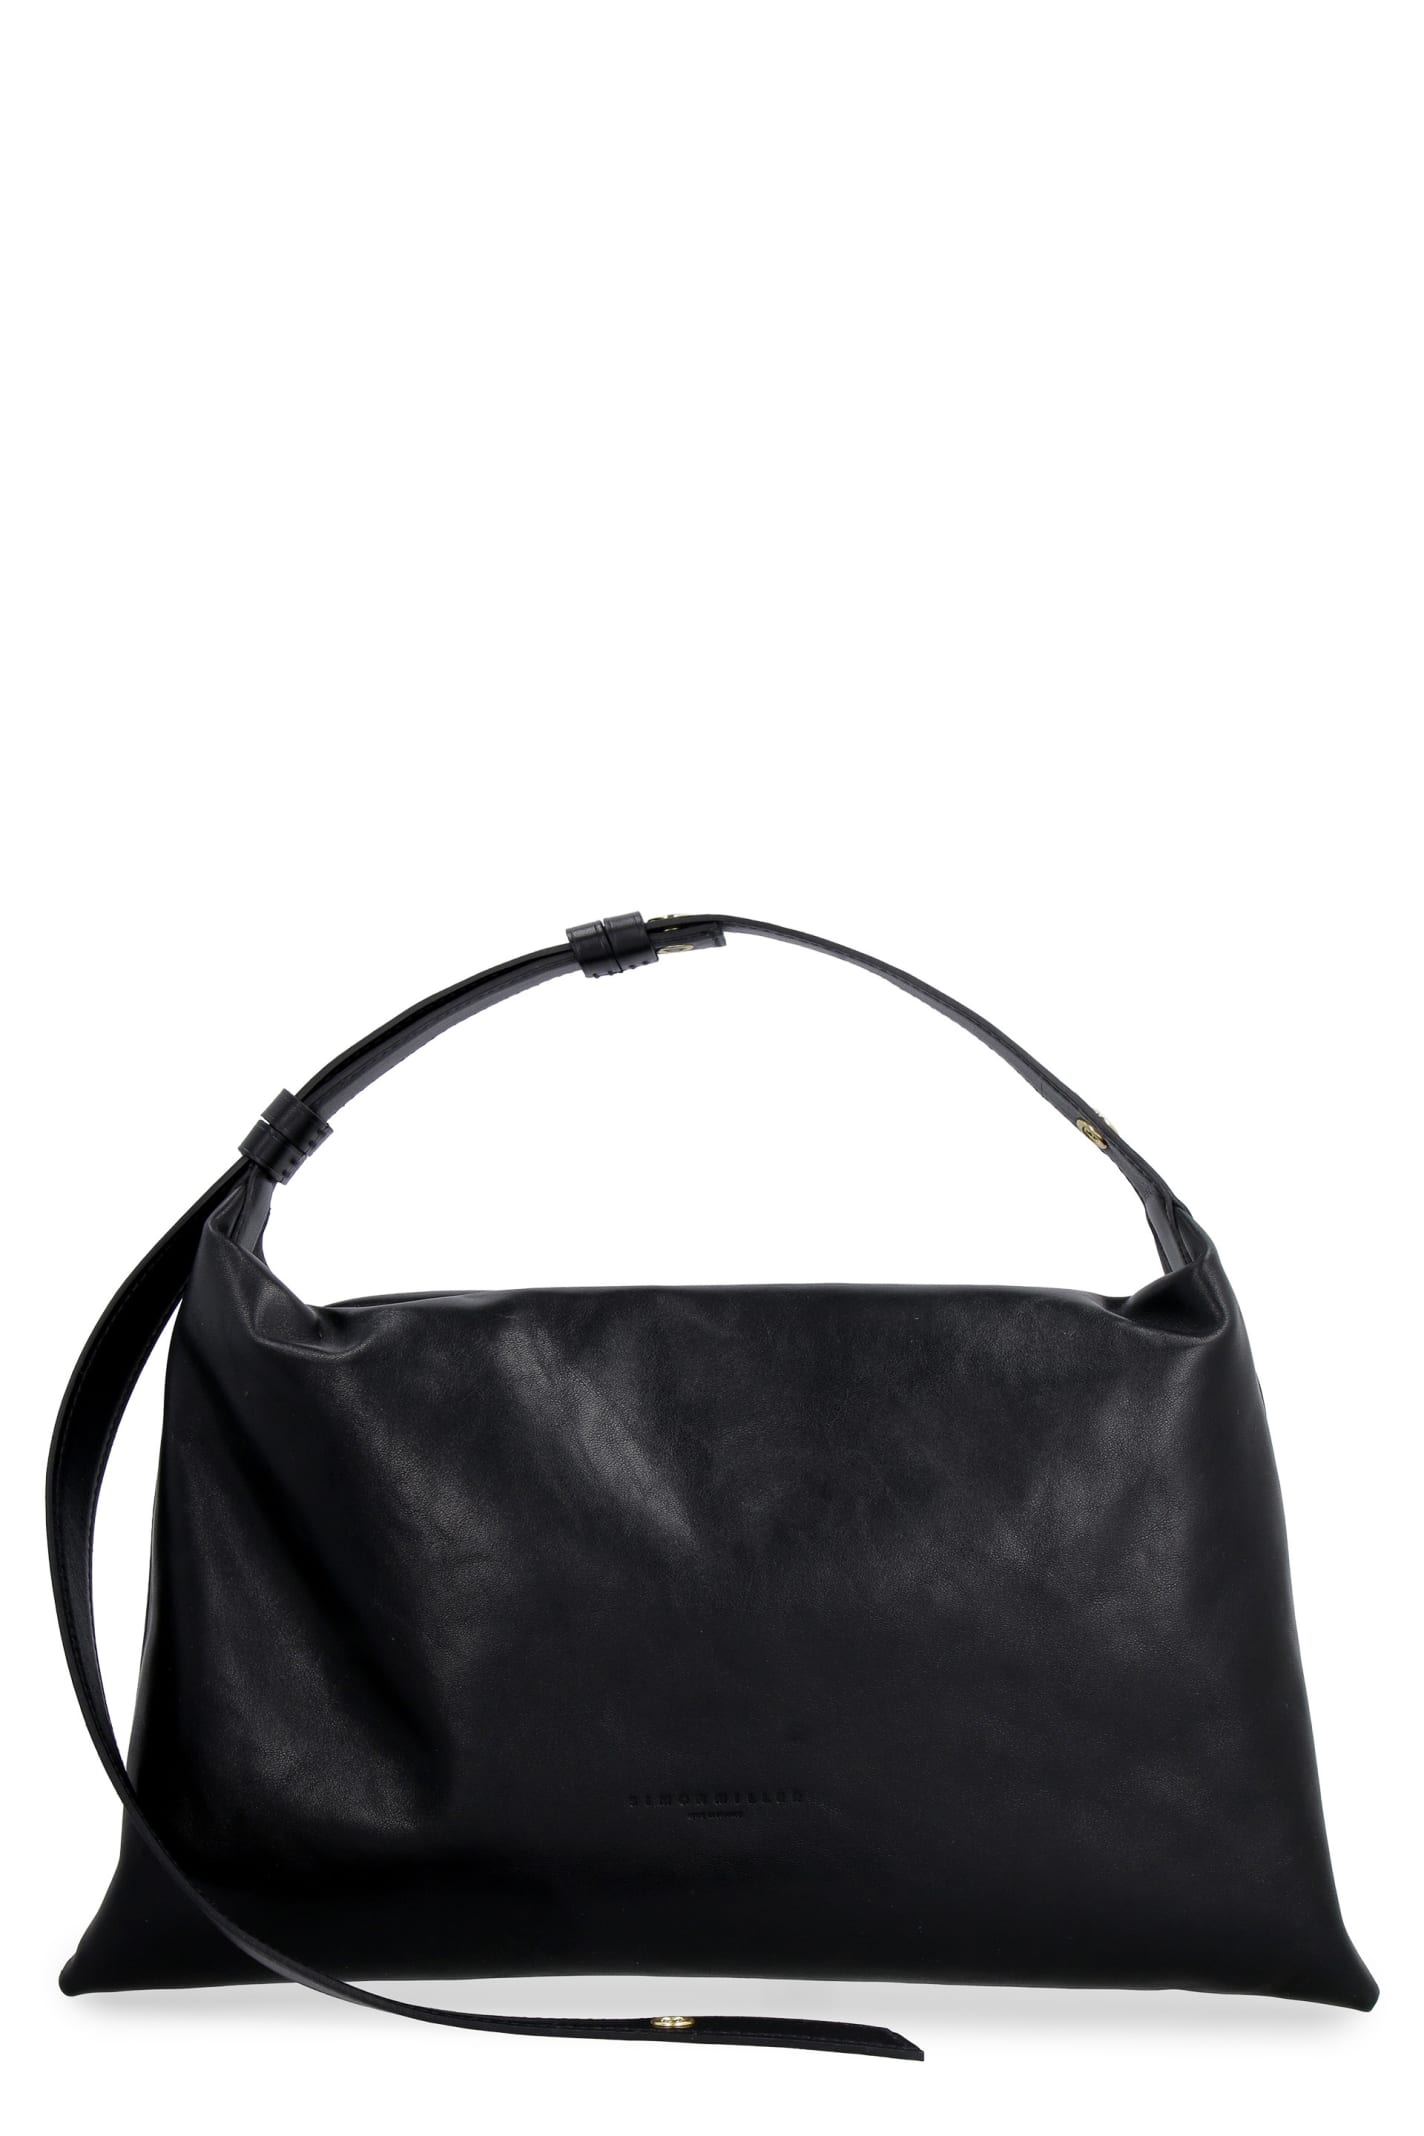 SIMON MILLER PUFFIN LEATHER BAG,11328580